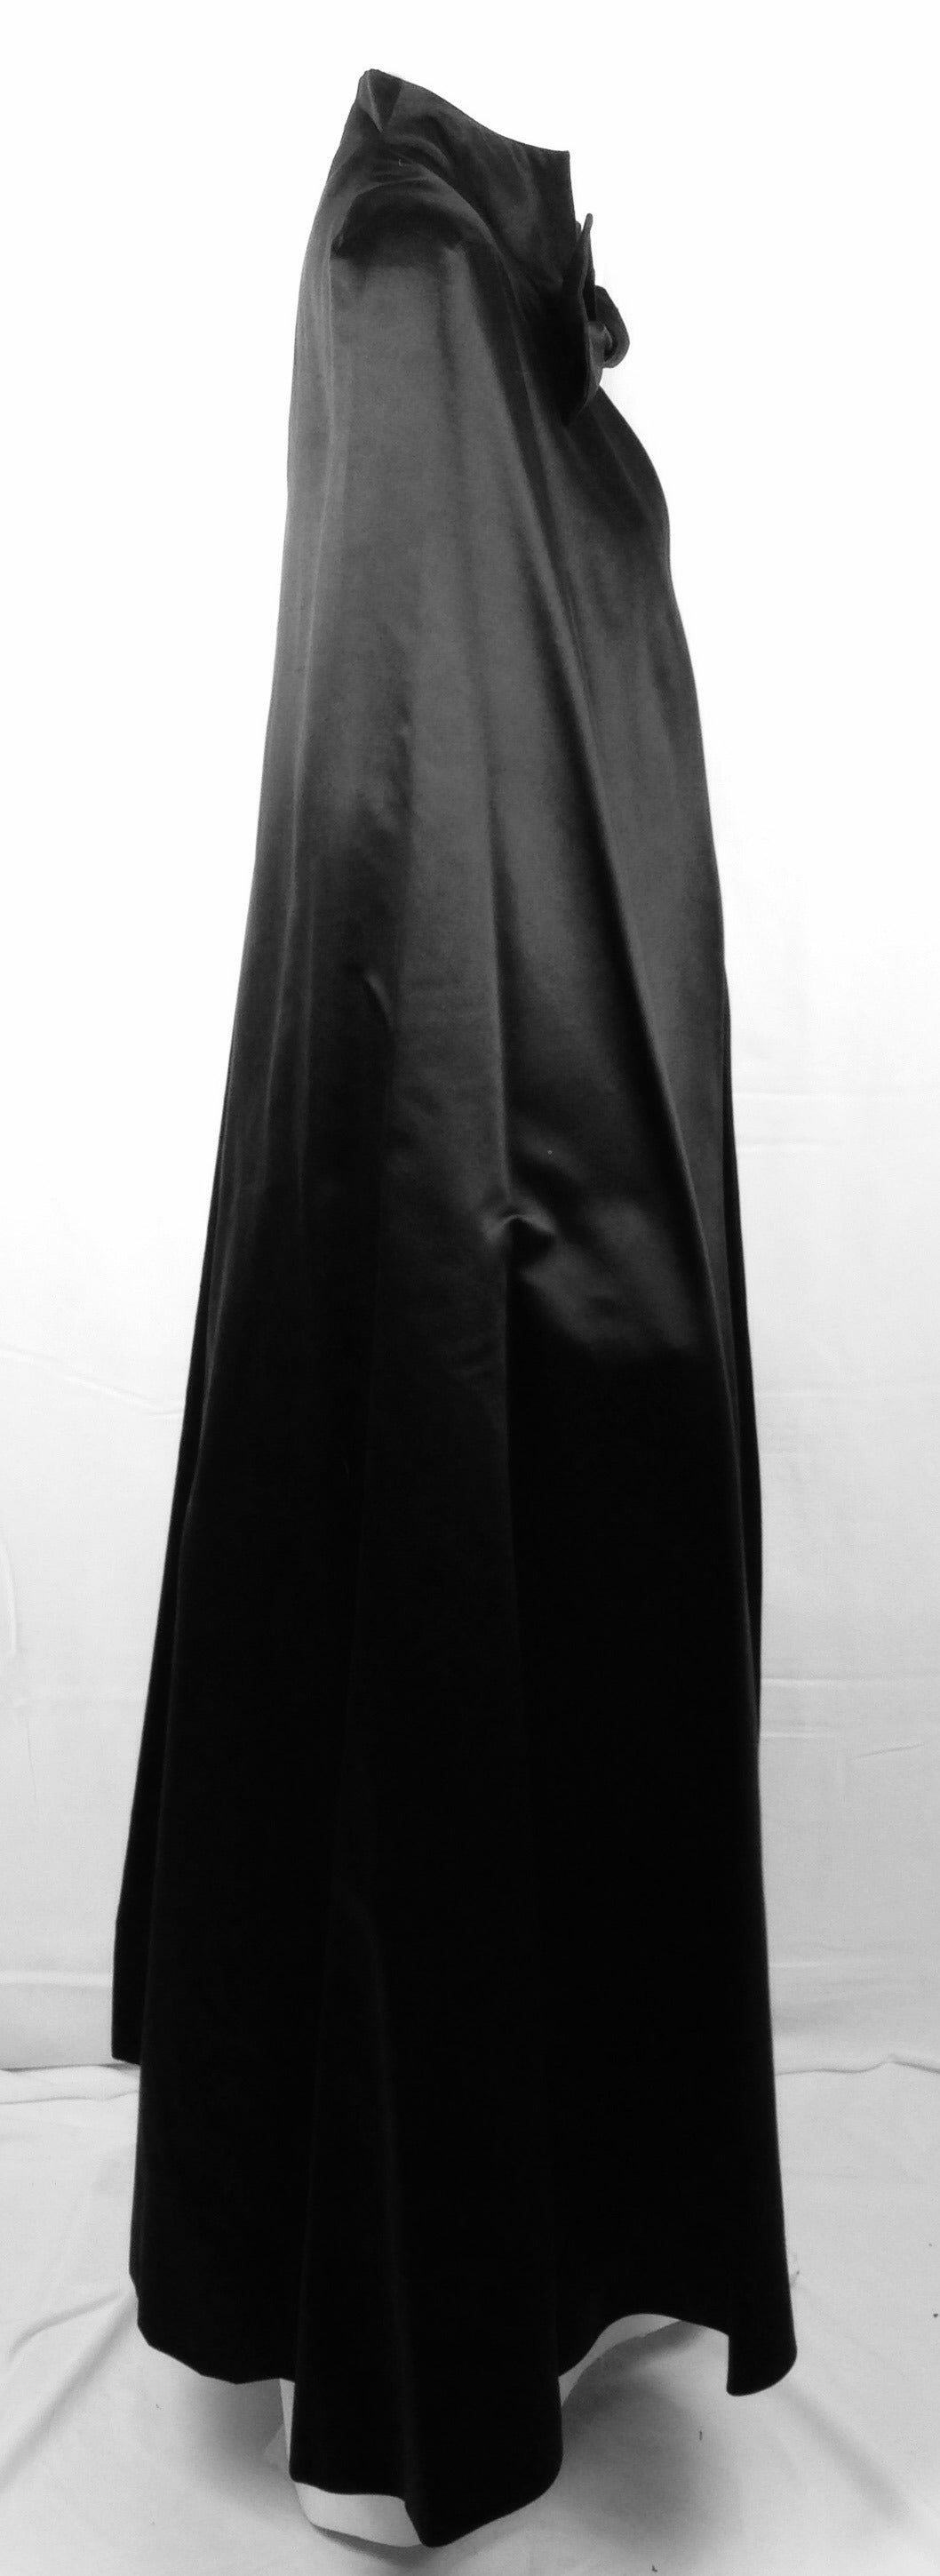 Embrace your inner phantom and make an unforgettable entrance in this stunning long black satin cape by famed designer Pauline Trigere.  Trigere's French background and training are evident in this deceptively simple design.    Self-tying,